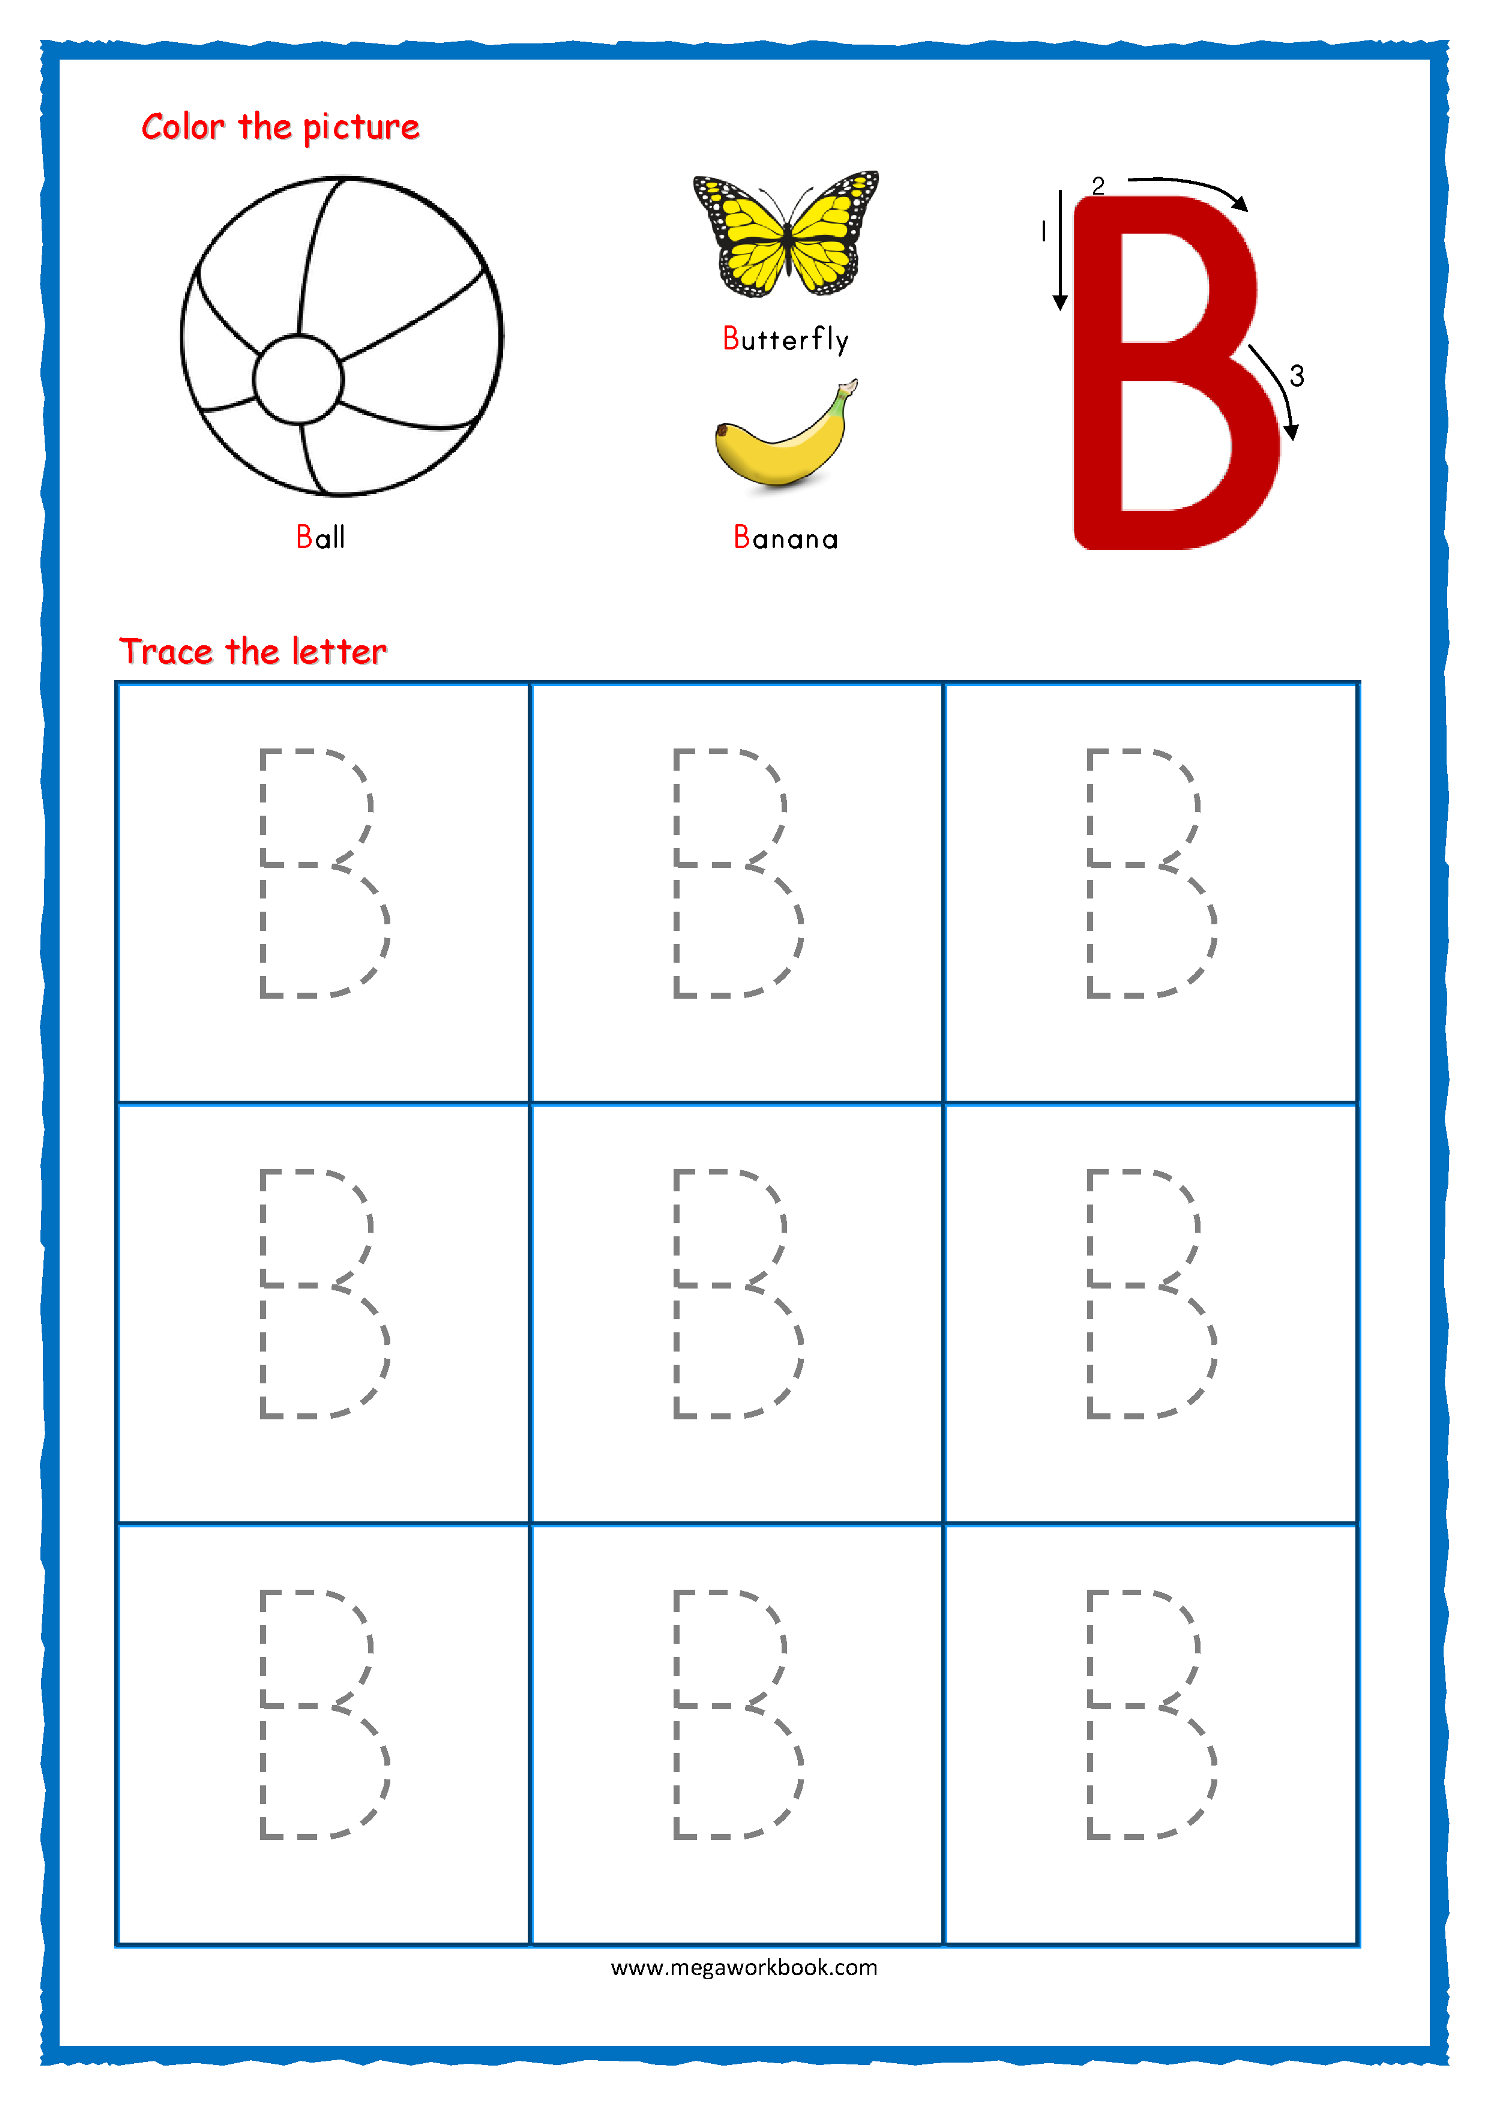 Coloring Book : Free Preschool Printables Coloring Book for Tracing Letters With Pictures